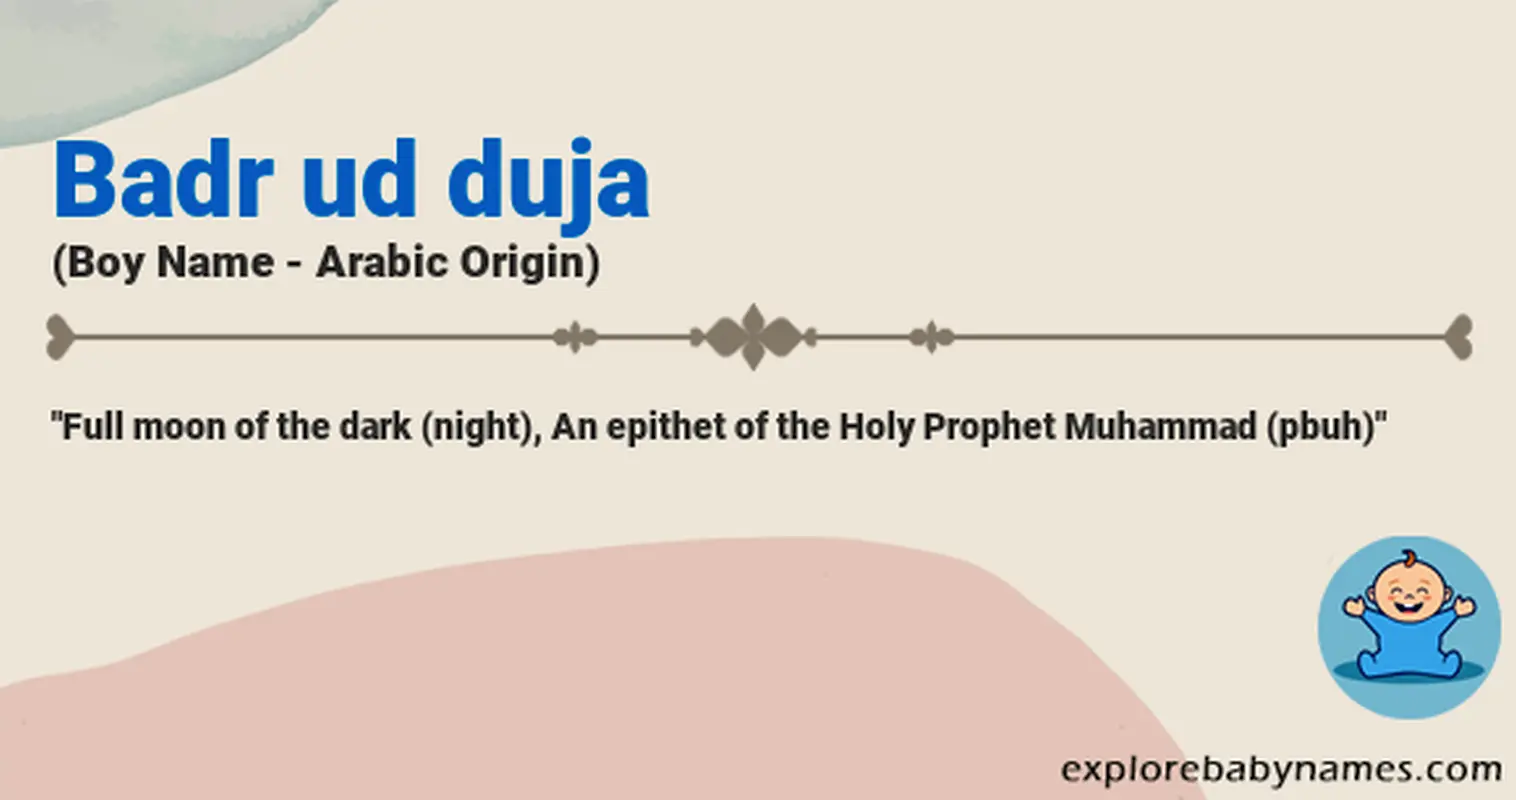 Meaning of Badr ud duja